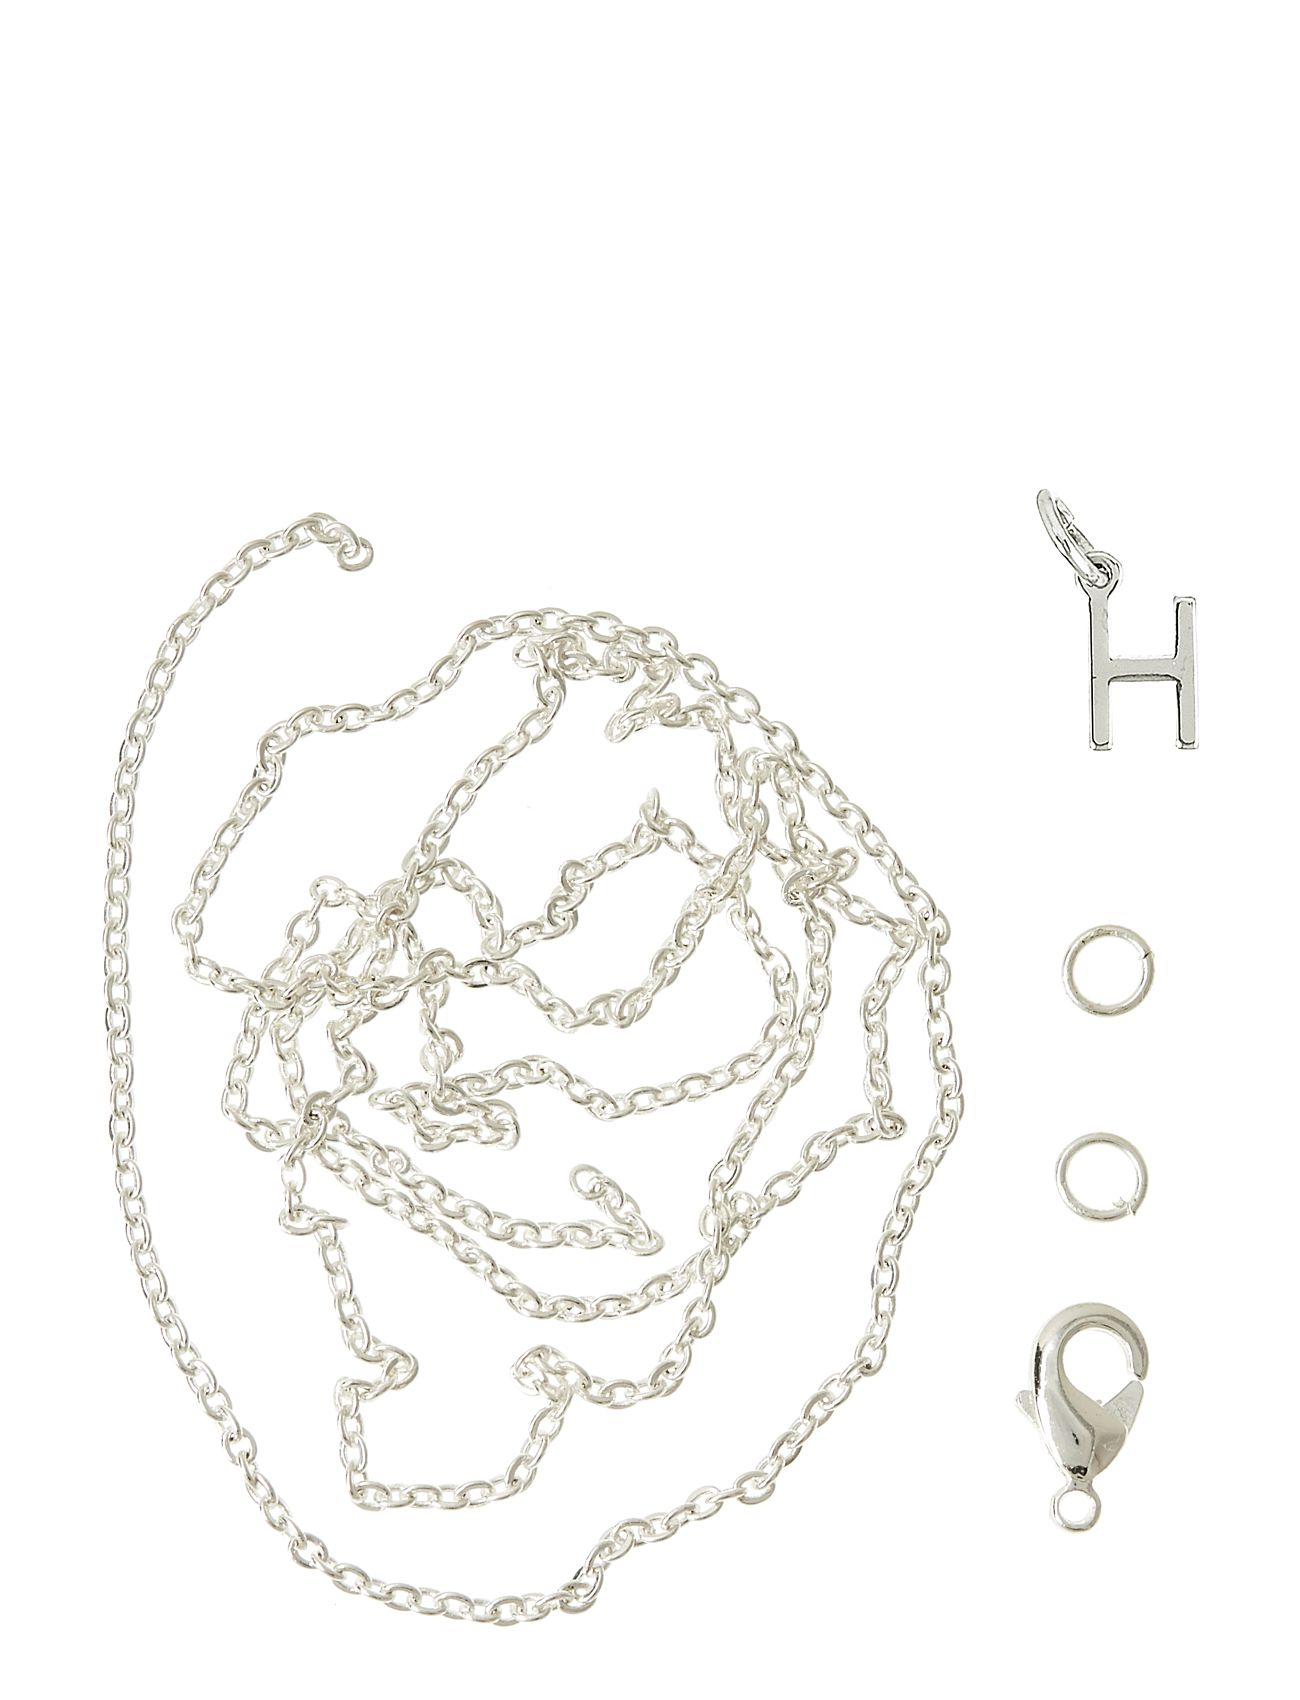 Letter H Sp With O-Ring, Chain And Clasp Toys Creativity Drawing & Crafts Craft Jewellery & Accessories Silver Me & My Box